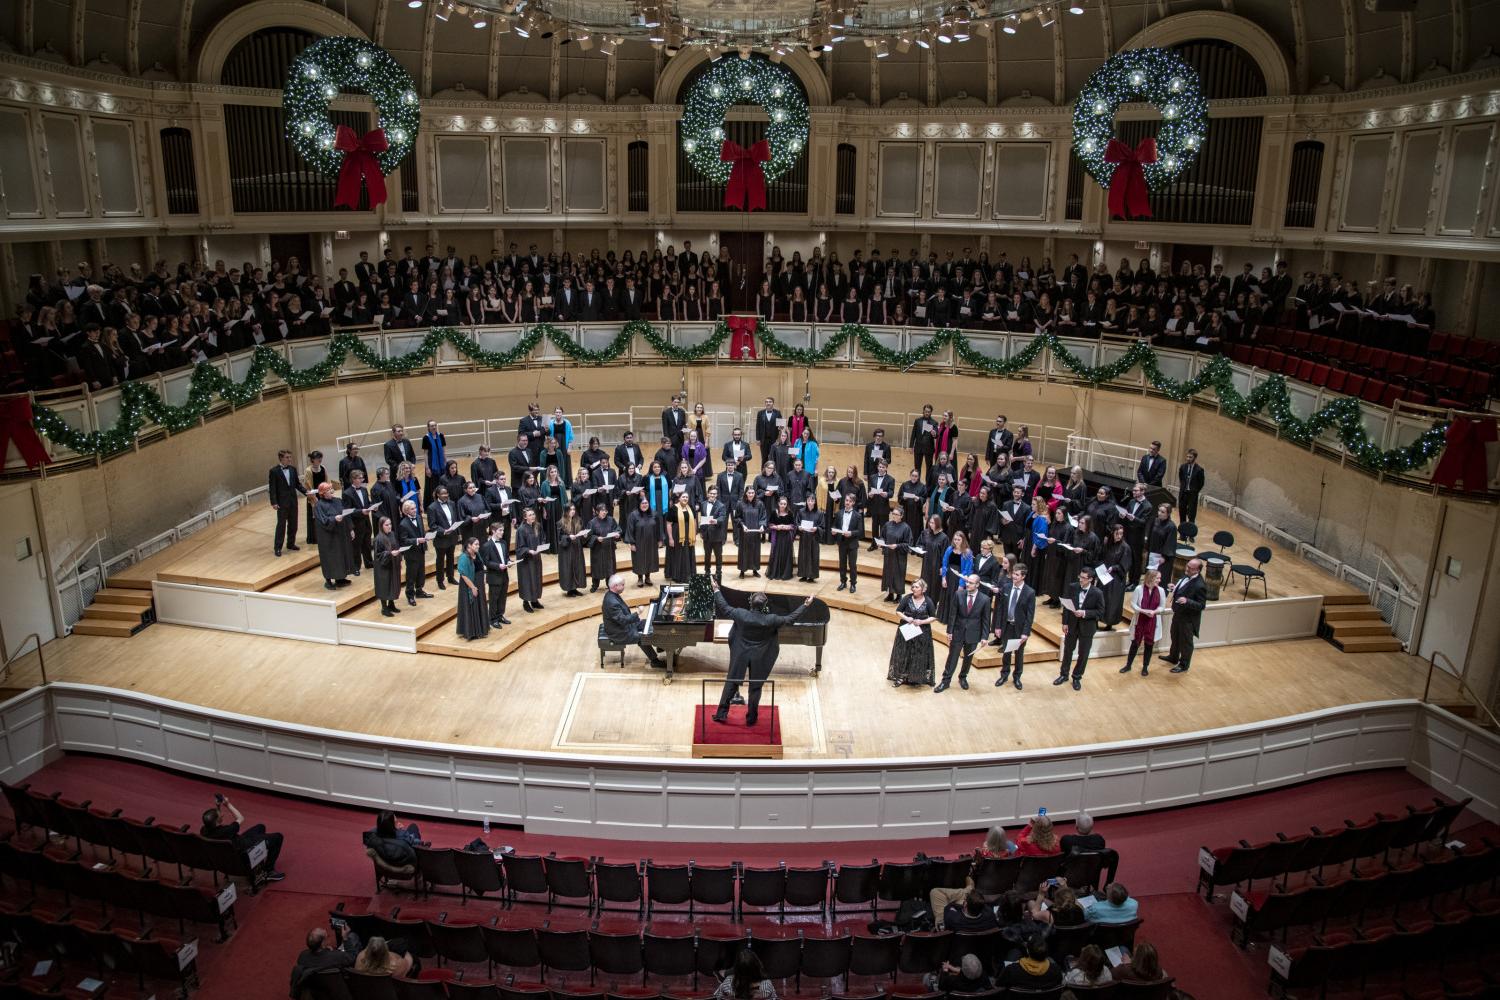 The <a href='http://m59n.uncsj.com'>bv伟德ios下载</a> Choir performs in the Chicago Symphony Hall.